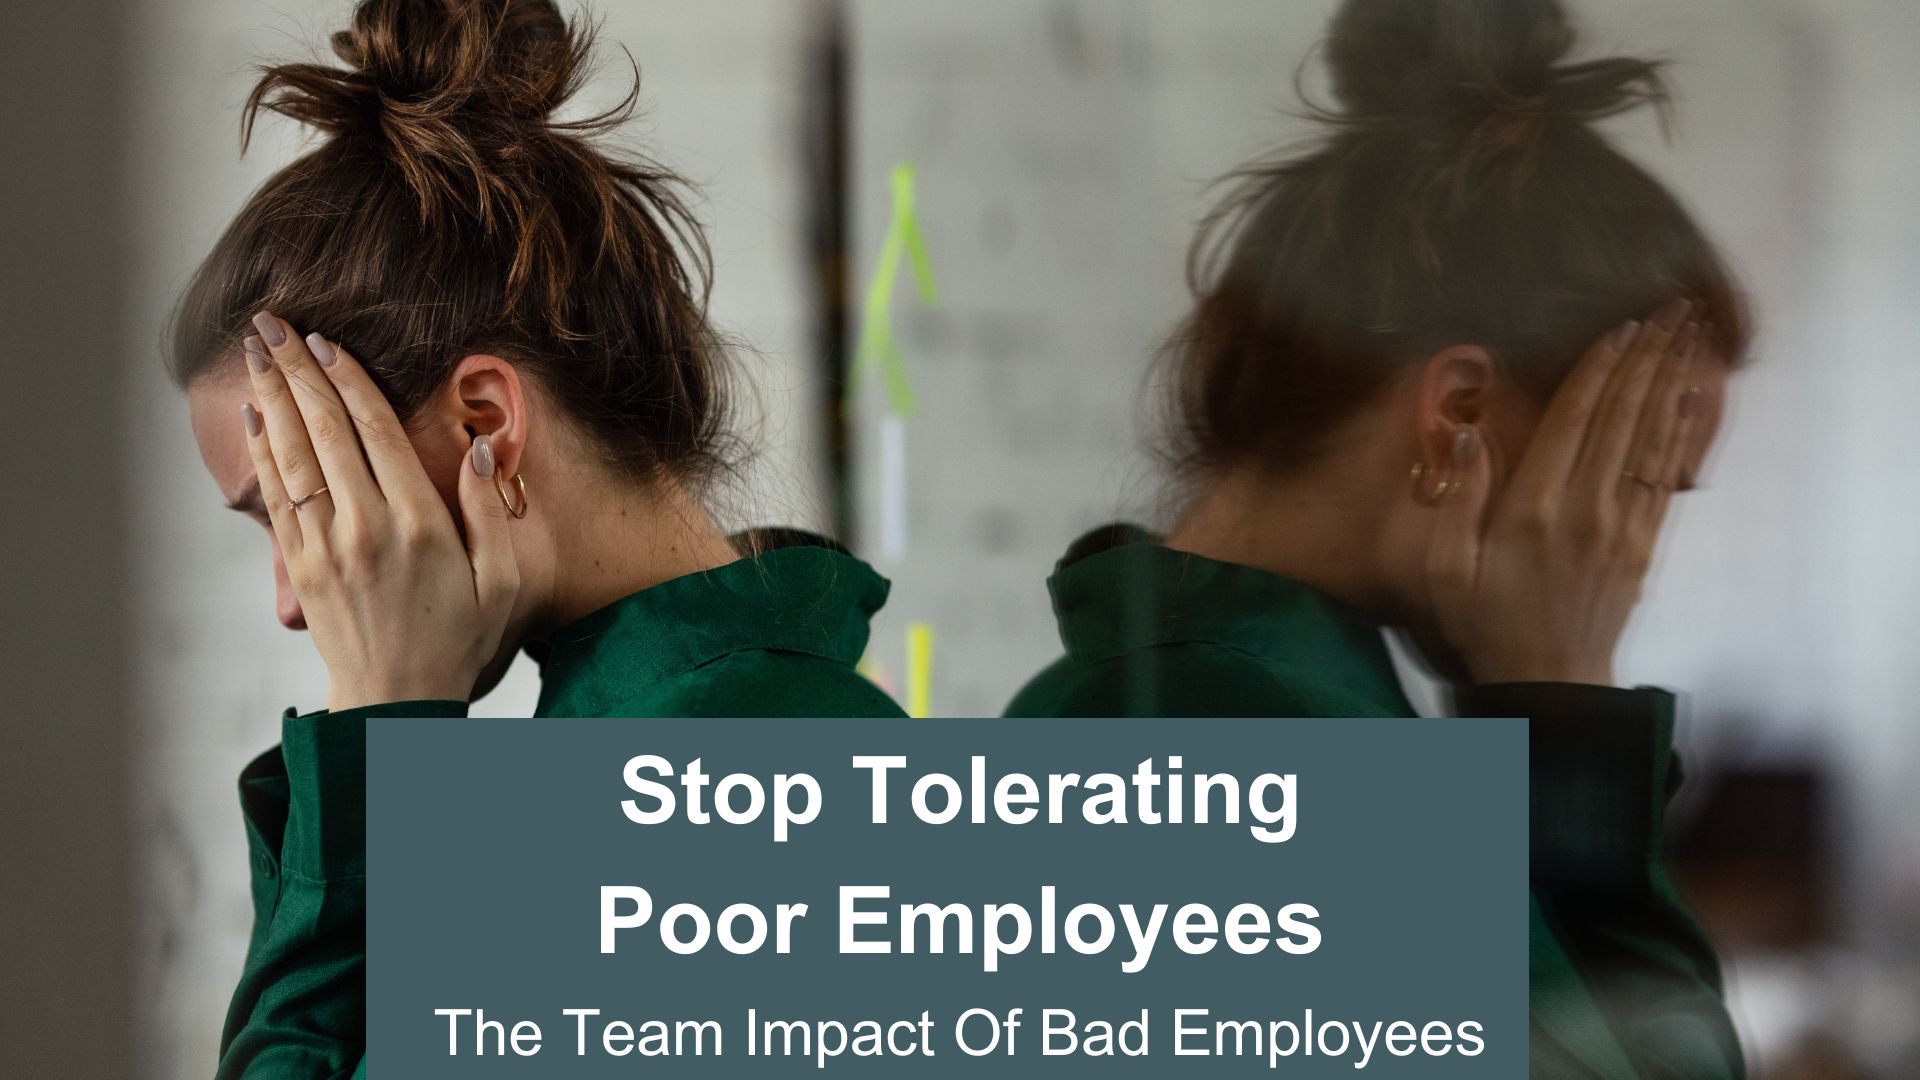 Stop tolerating poor employees - the team impact of bad employees